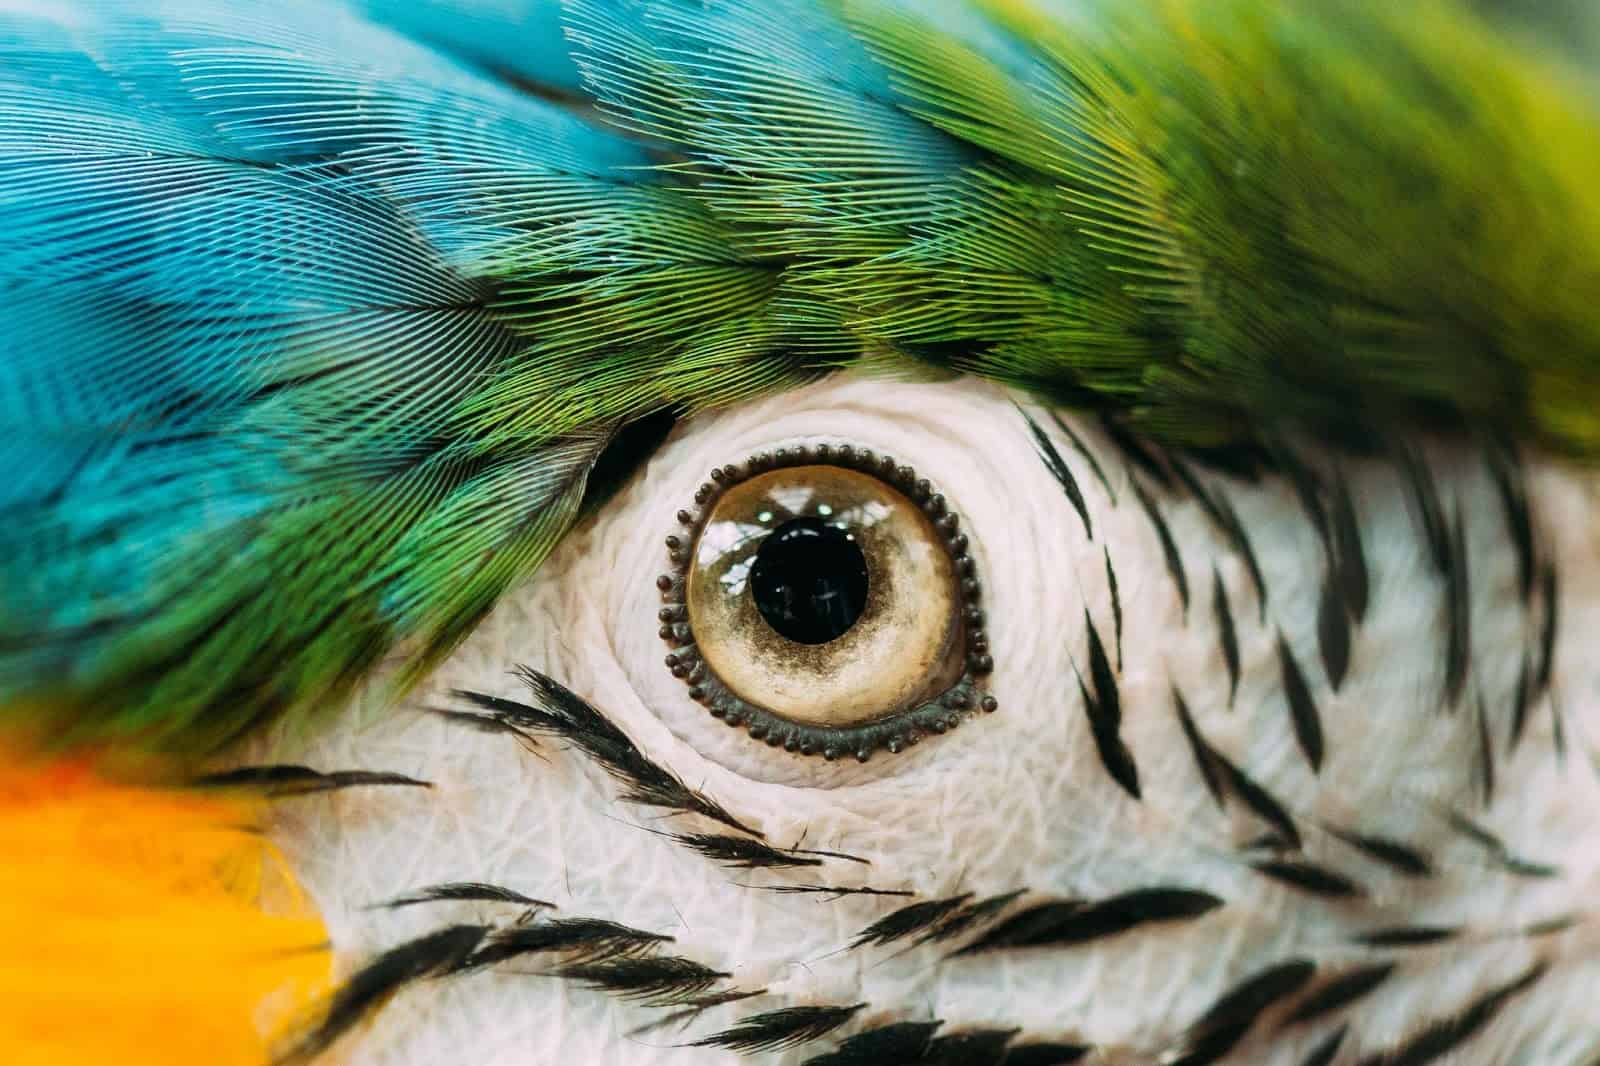 5 Facts About Parrots Eyes You Didn't Know - explained at Petrestart.com.